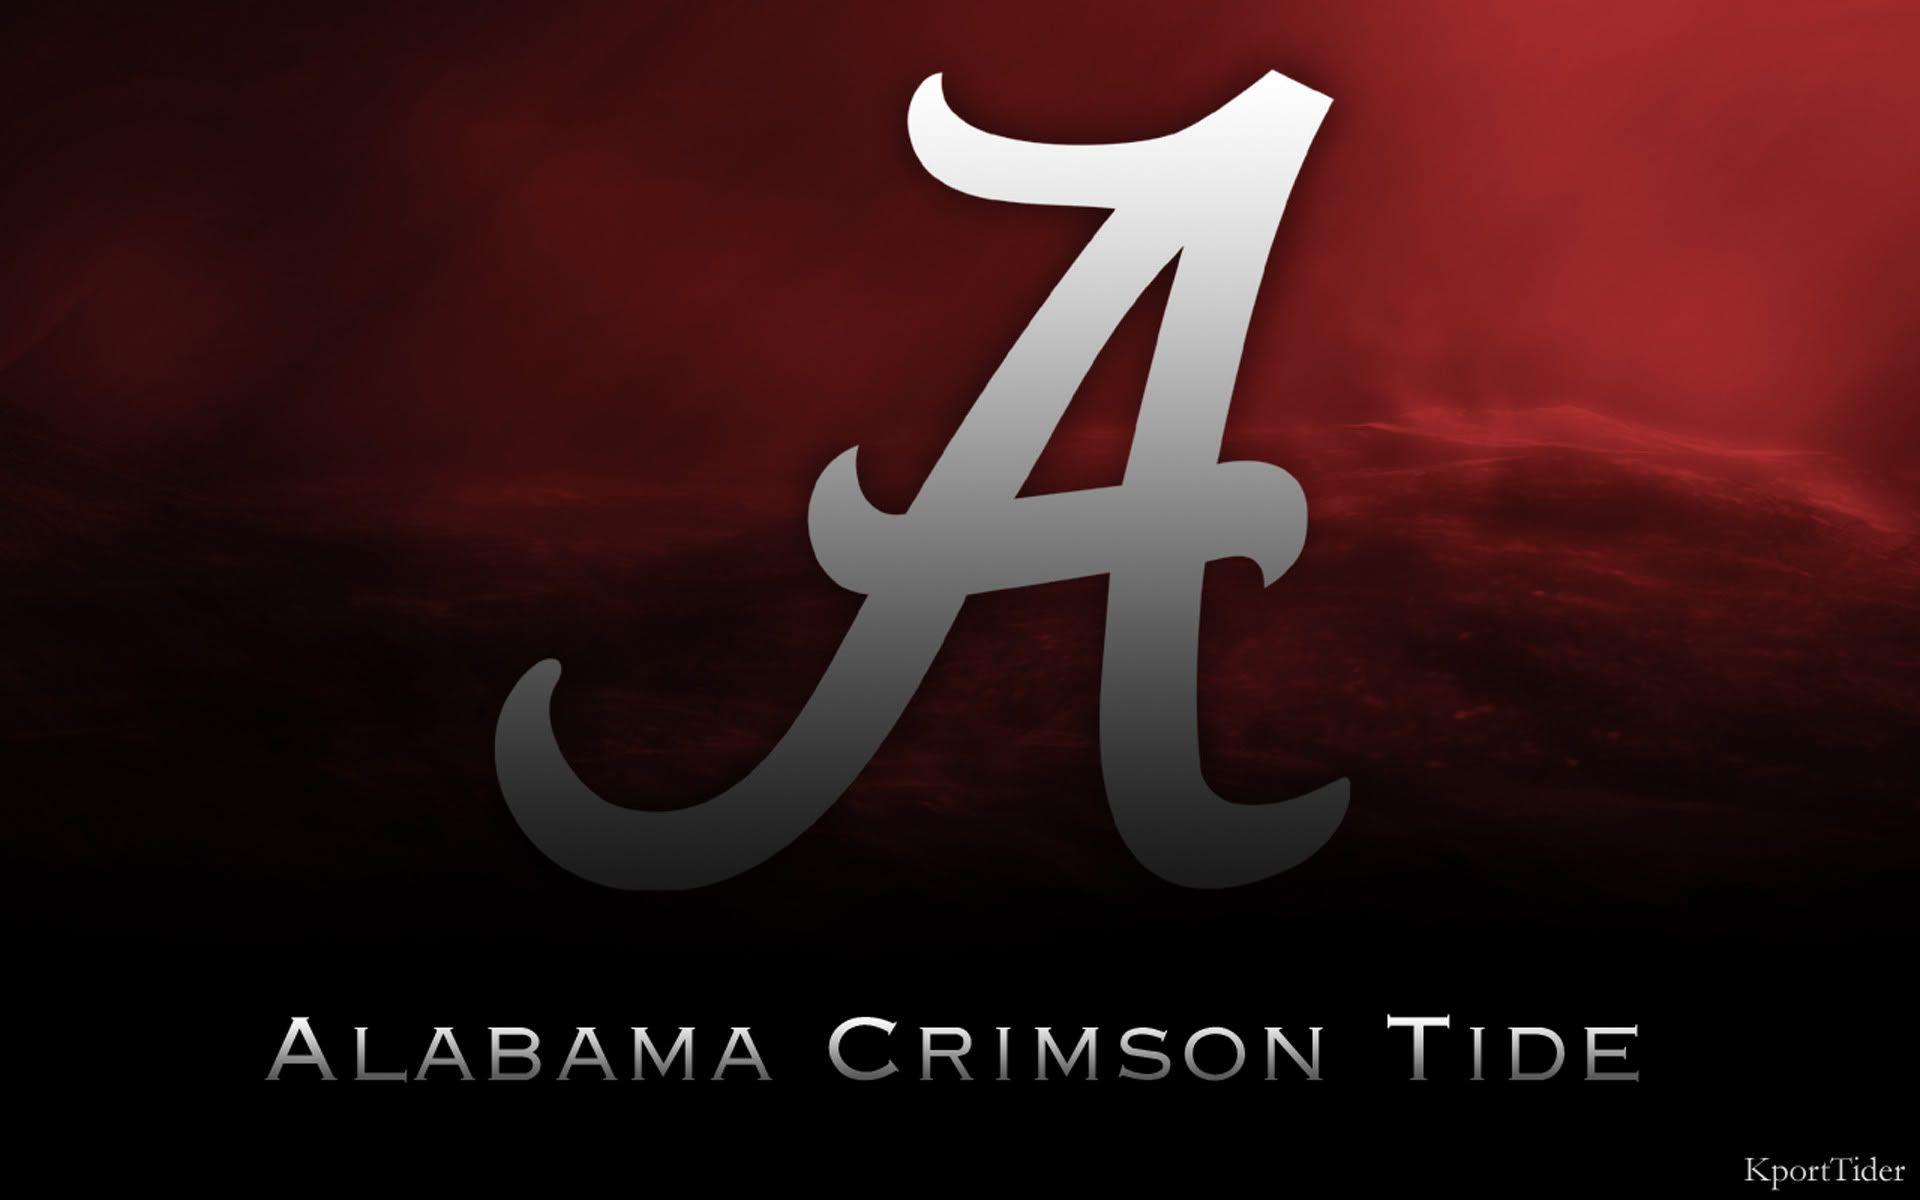 Maybe the best Bama Wallpaper I've ever seen